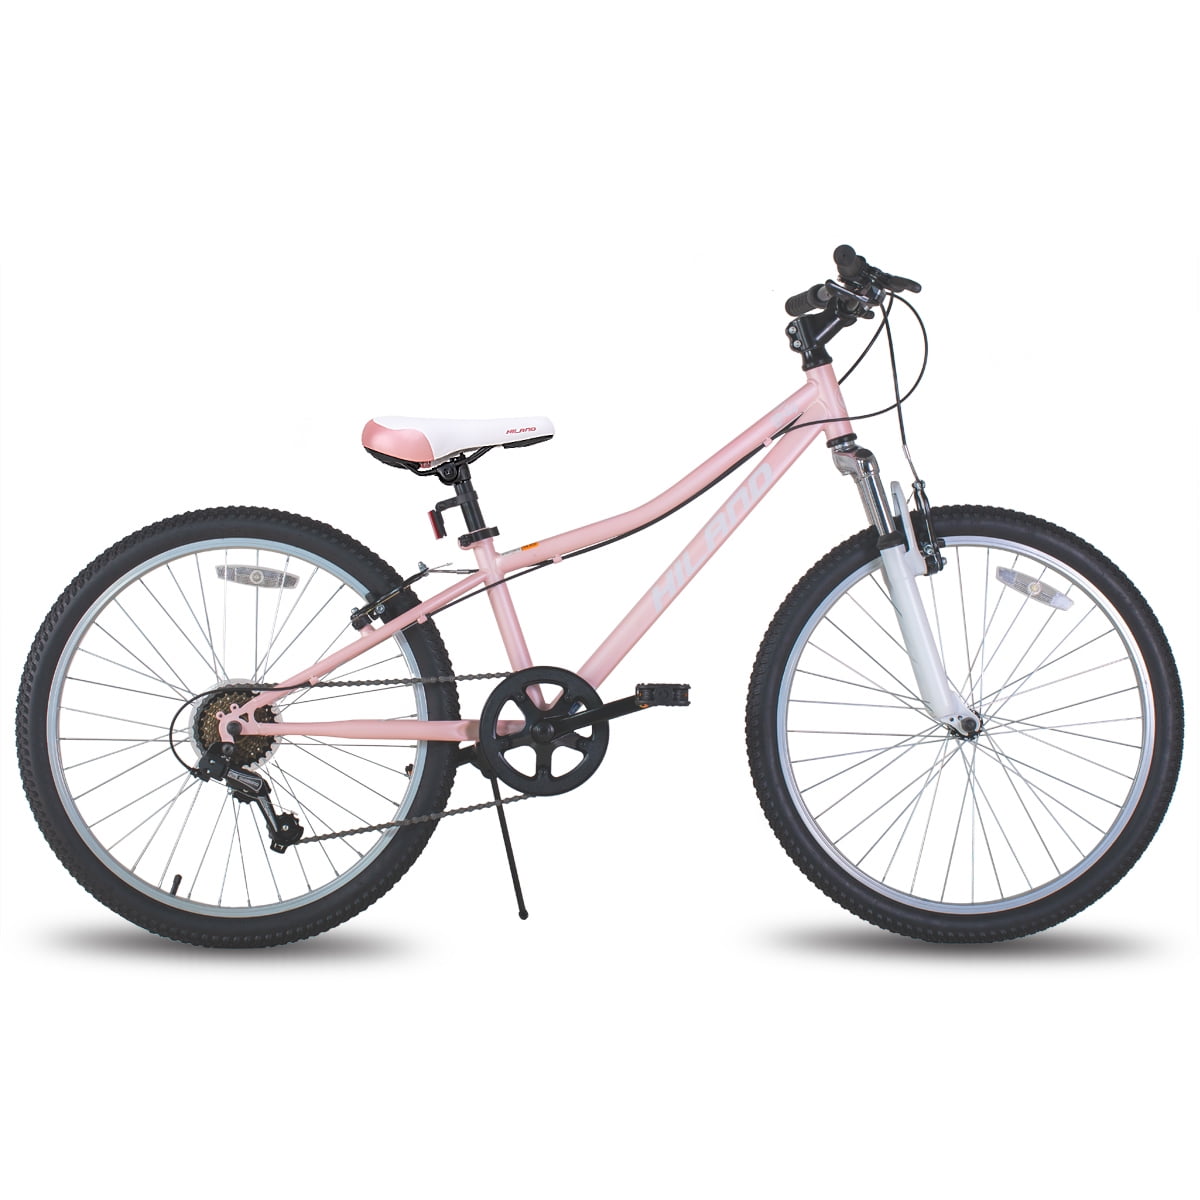 BCA 92065 20 inch Crossfire Girl's Mountain Bike Pink for sale online 